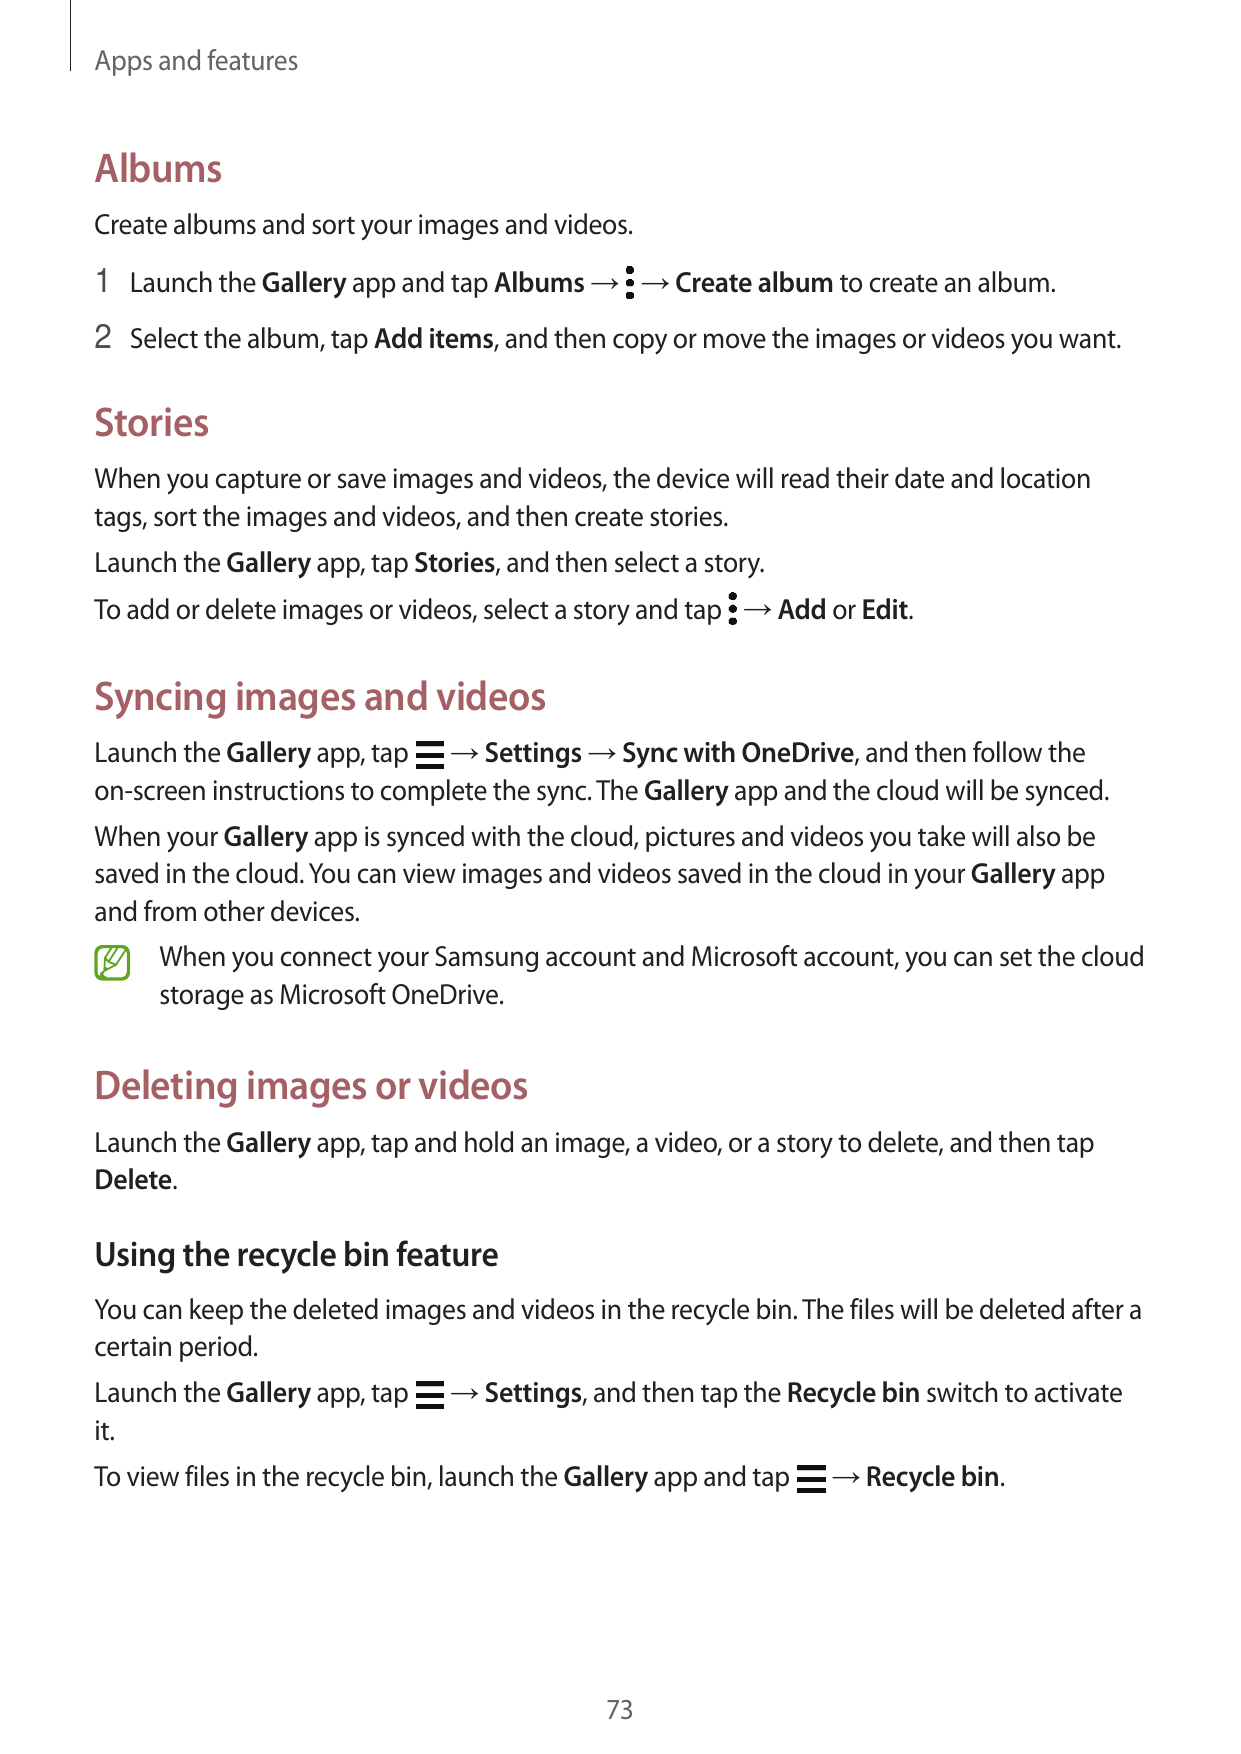 Apps and featuresAlbumsCreate albums and sort your images and videos.1 Launch the Gallery app and tap Albums → → Create album to